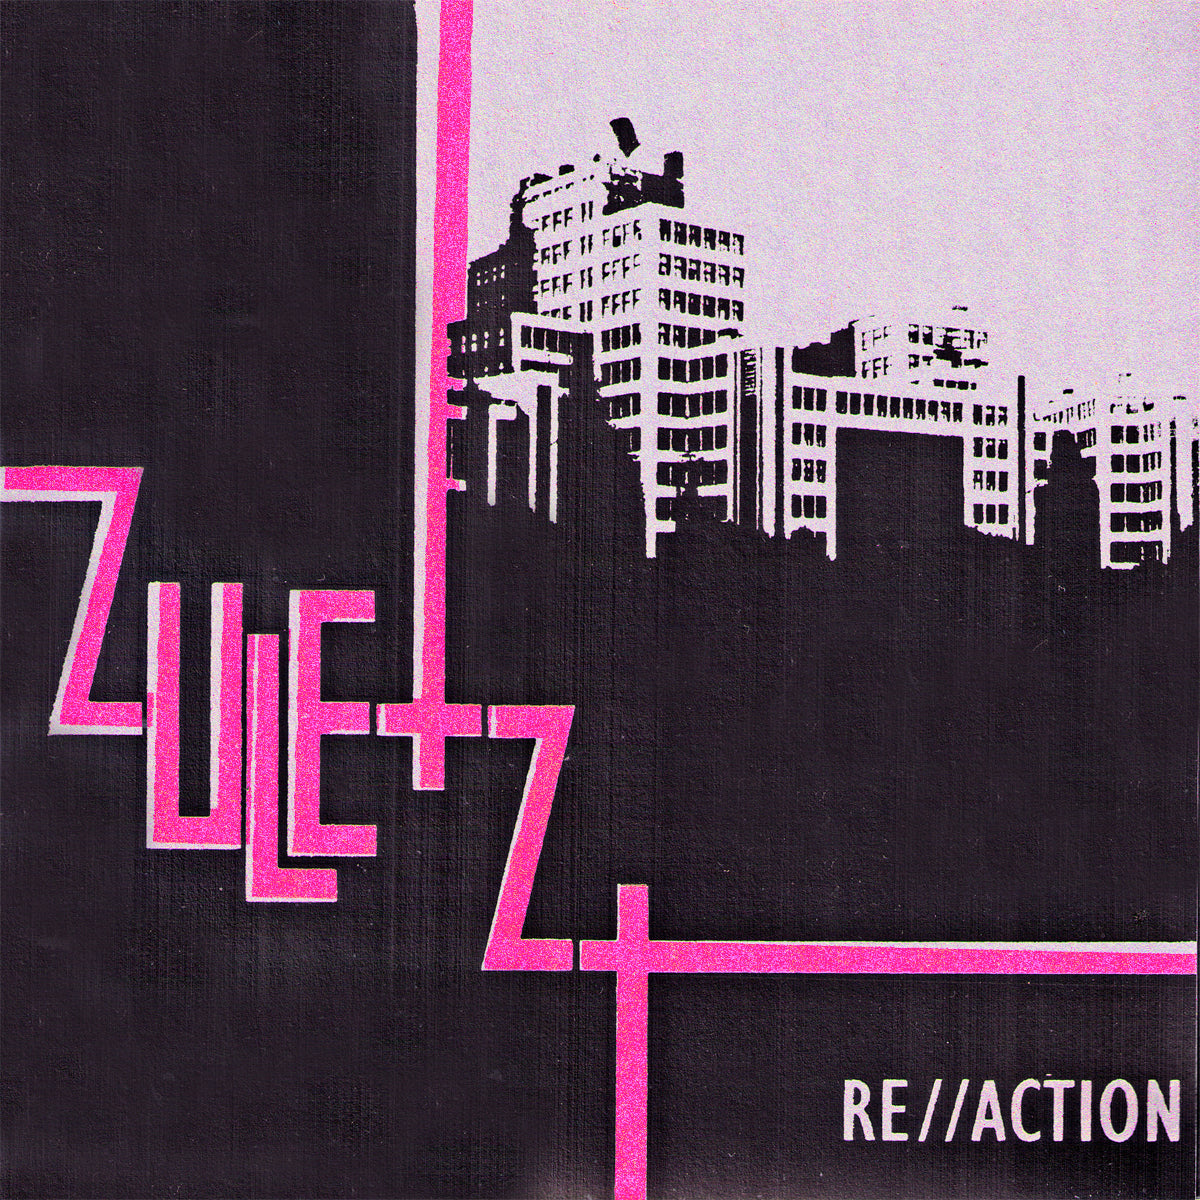 Zuletzt- Re//Action 7" ~RARE PINK BAND NAME CVR LIMITED TO 50 / EX MISCLACULATIONS!